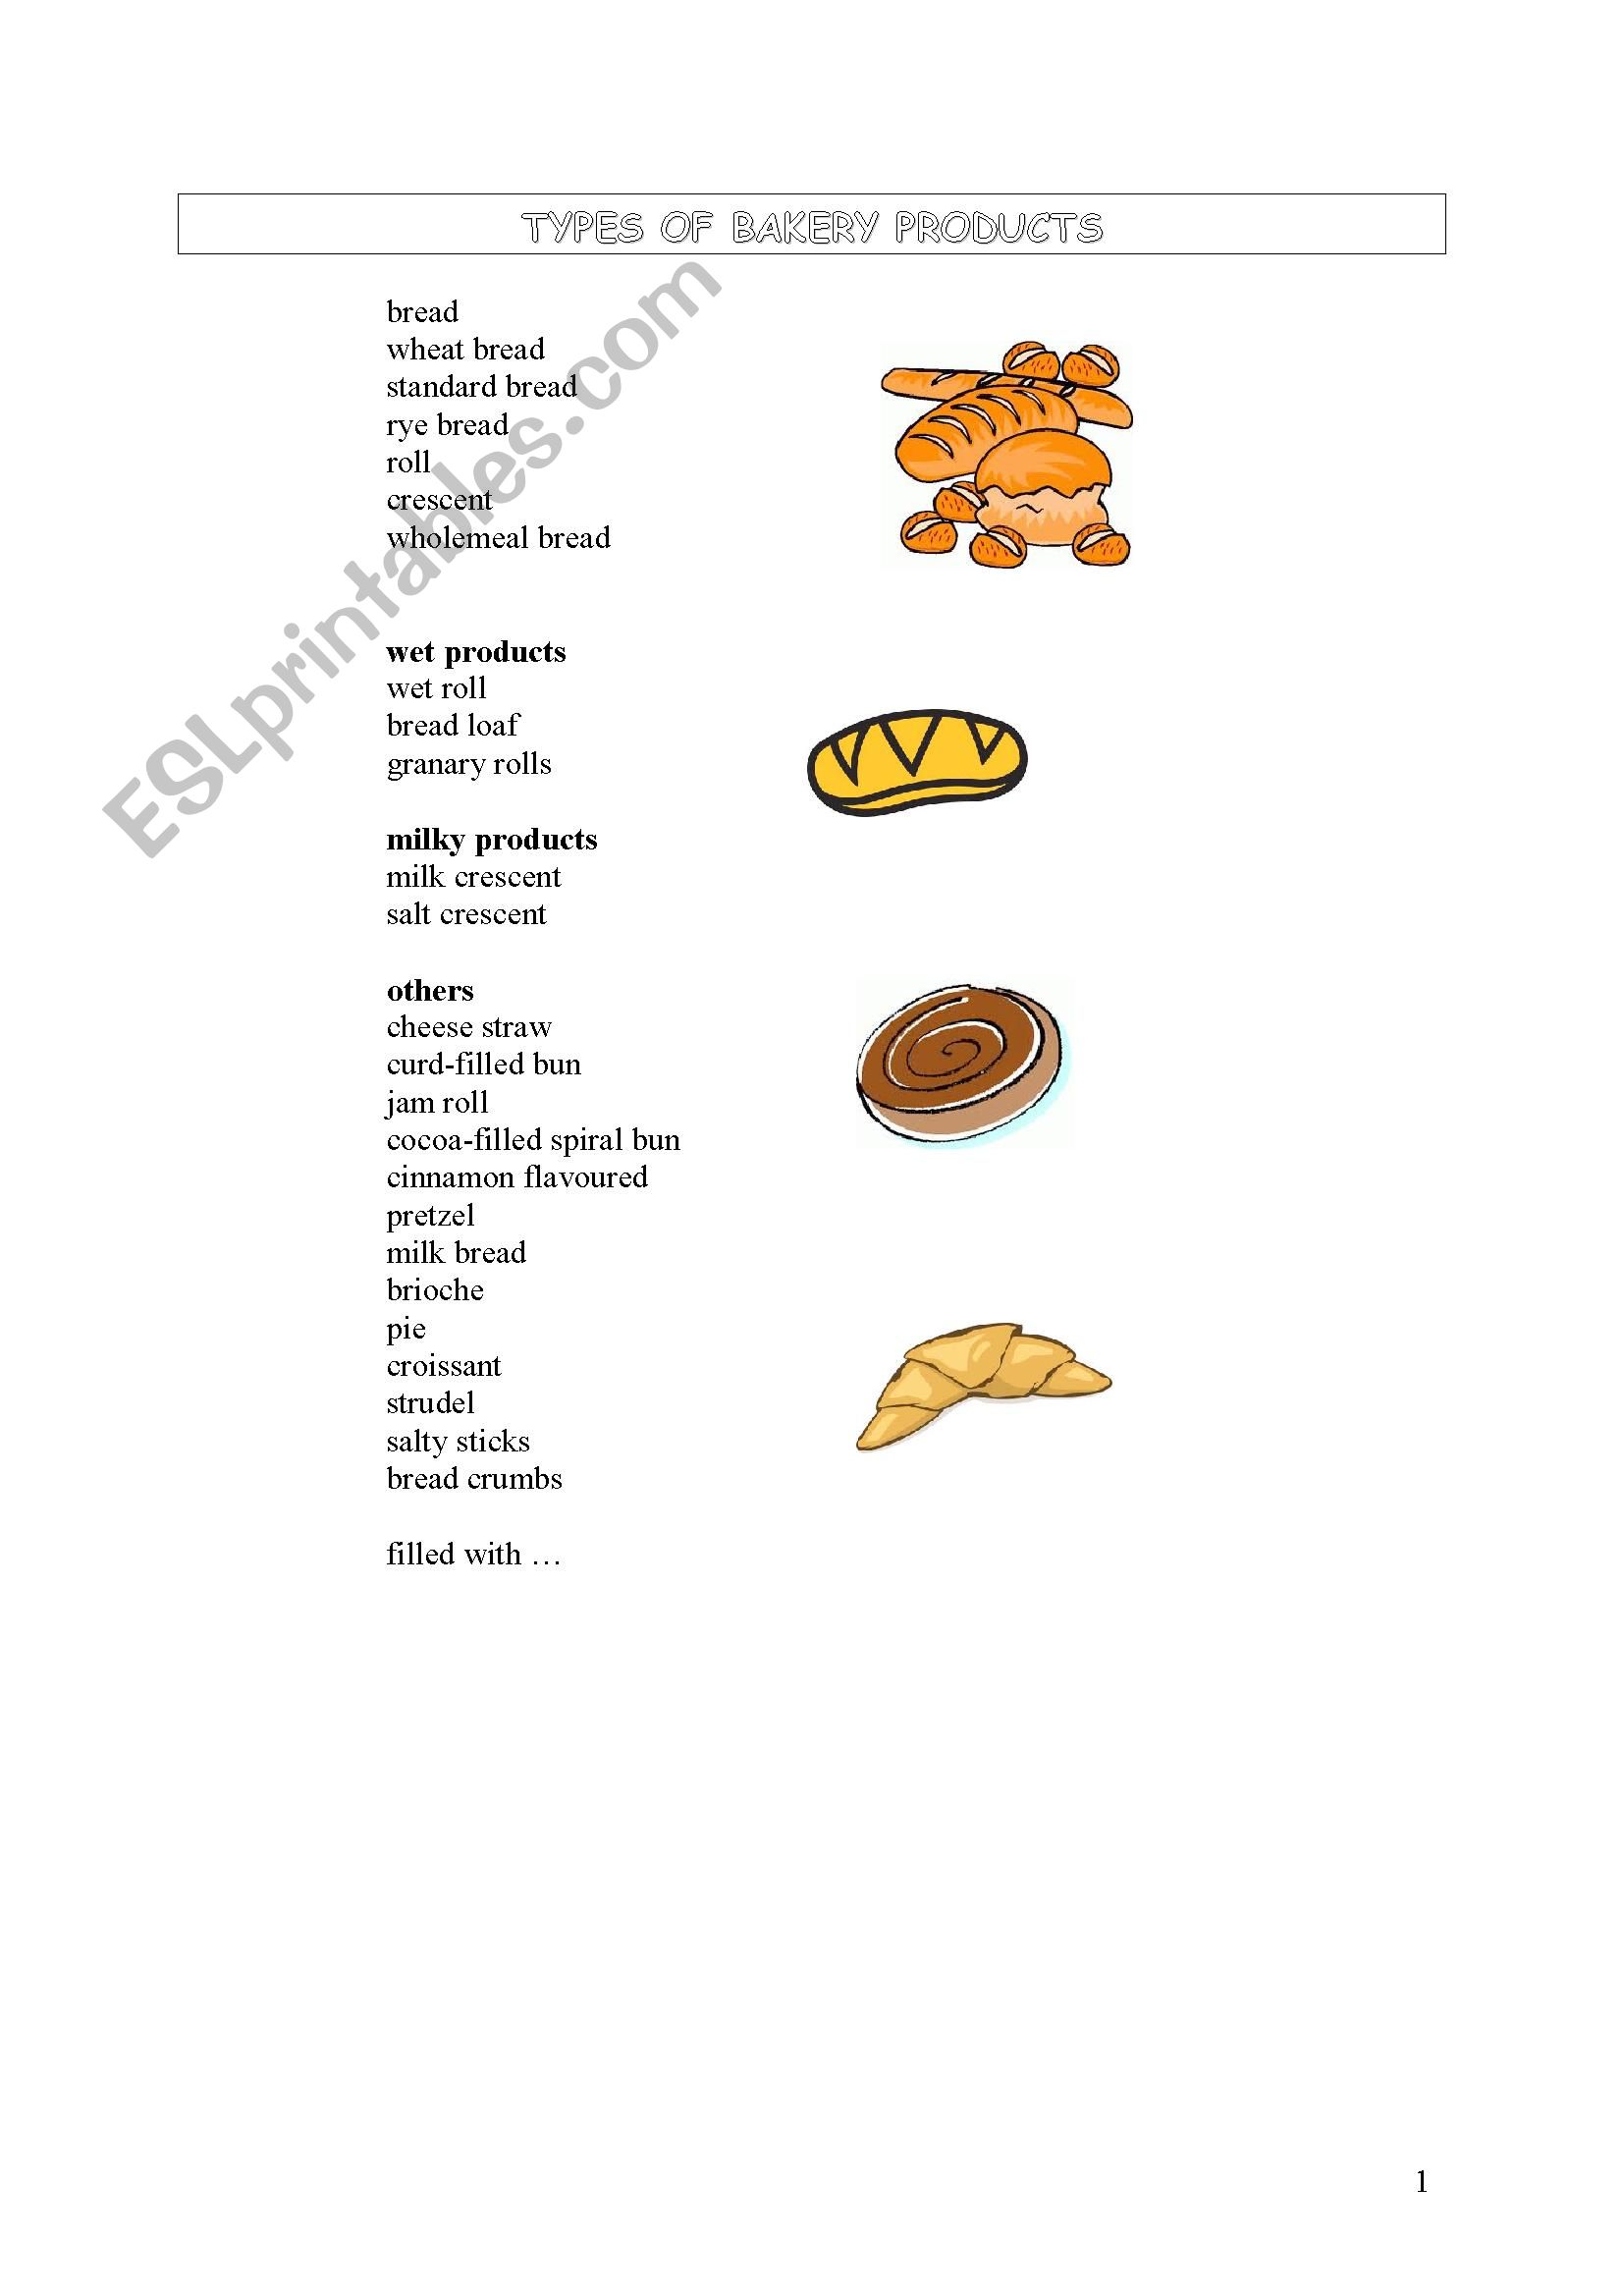 Bakery products worksheet